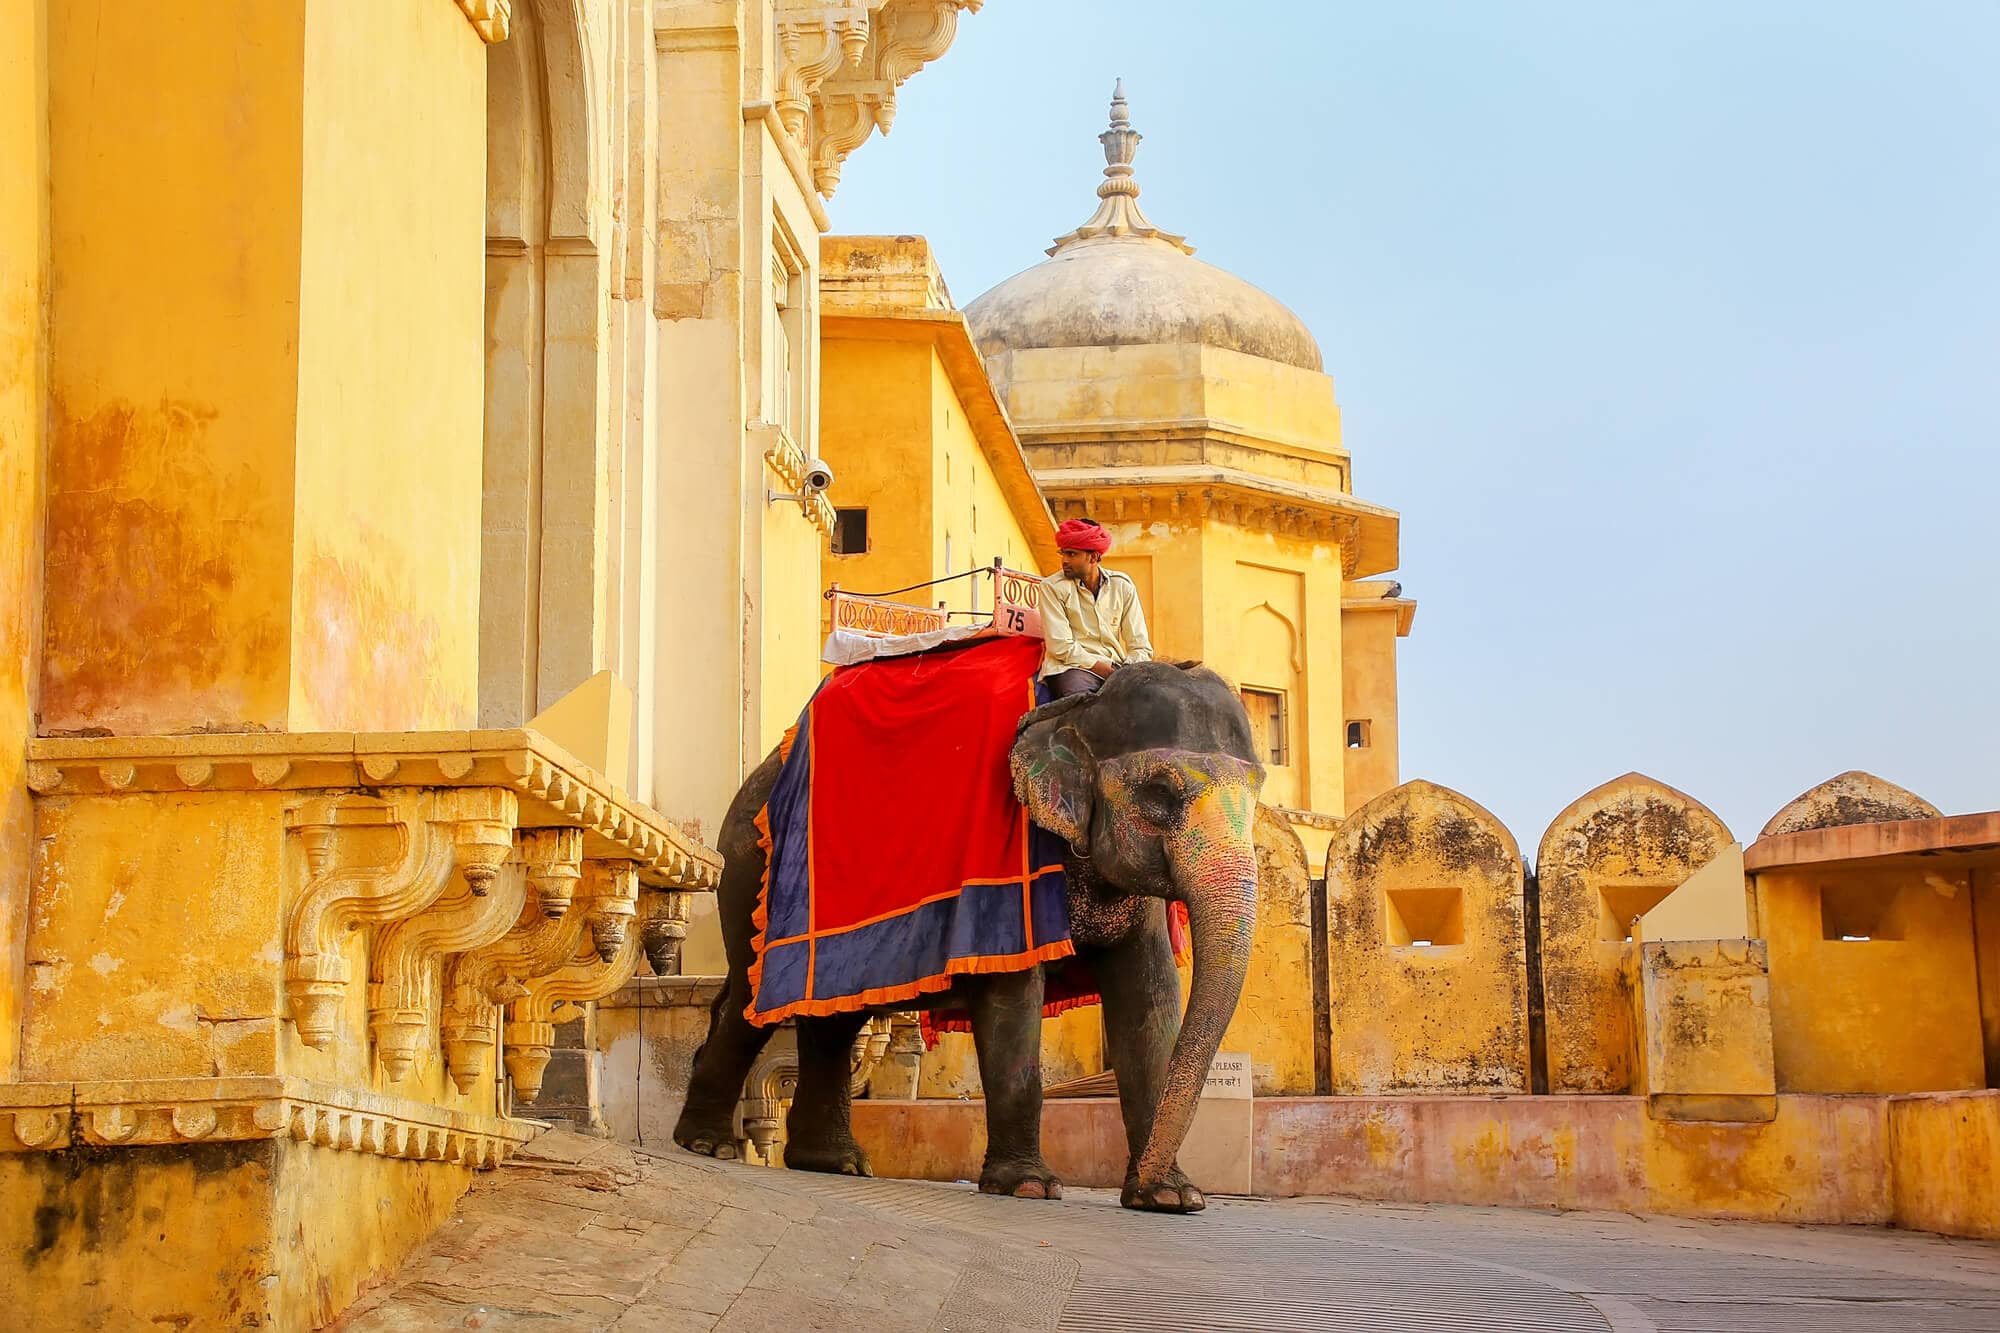 Elephant with a red blanket outside the golden Amber Fort in Jaipur.